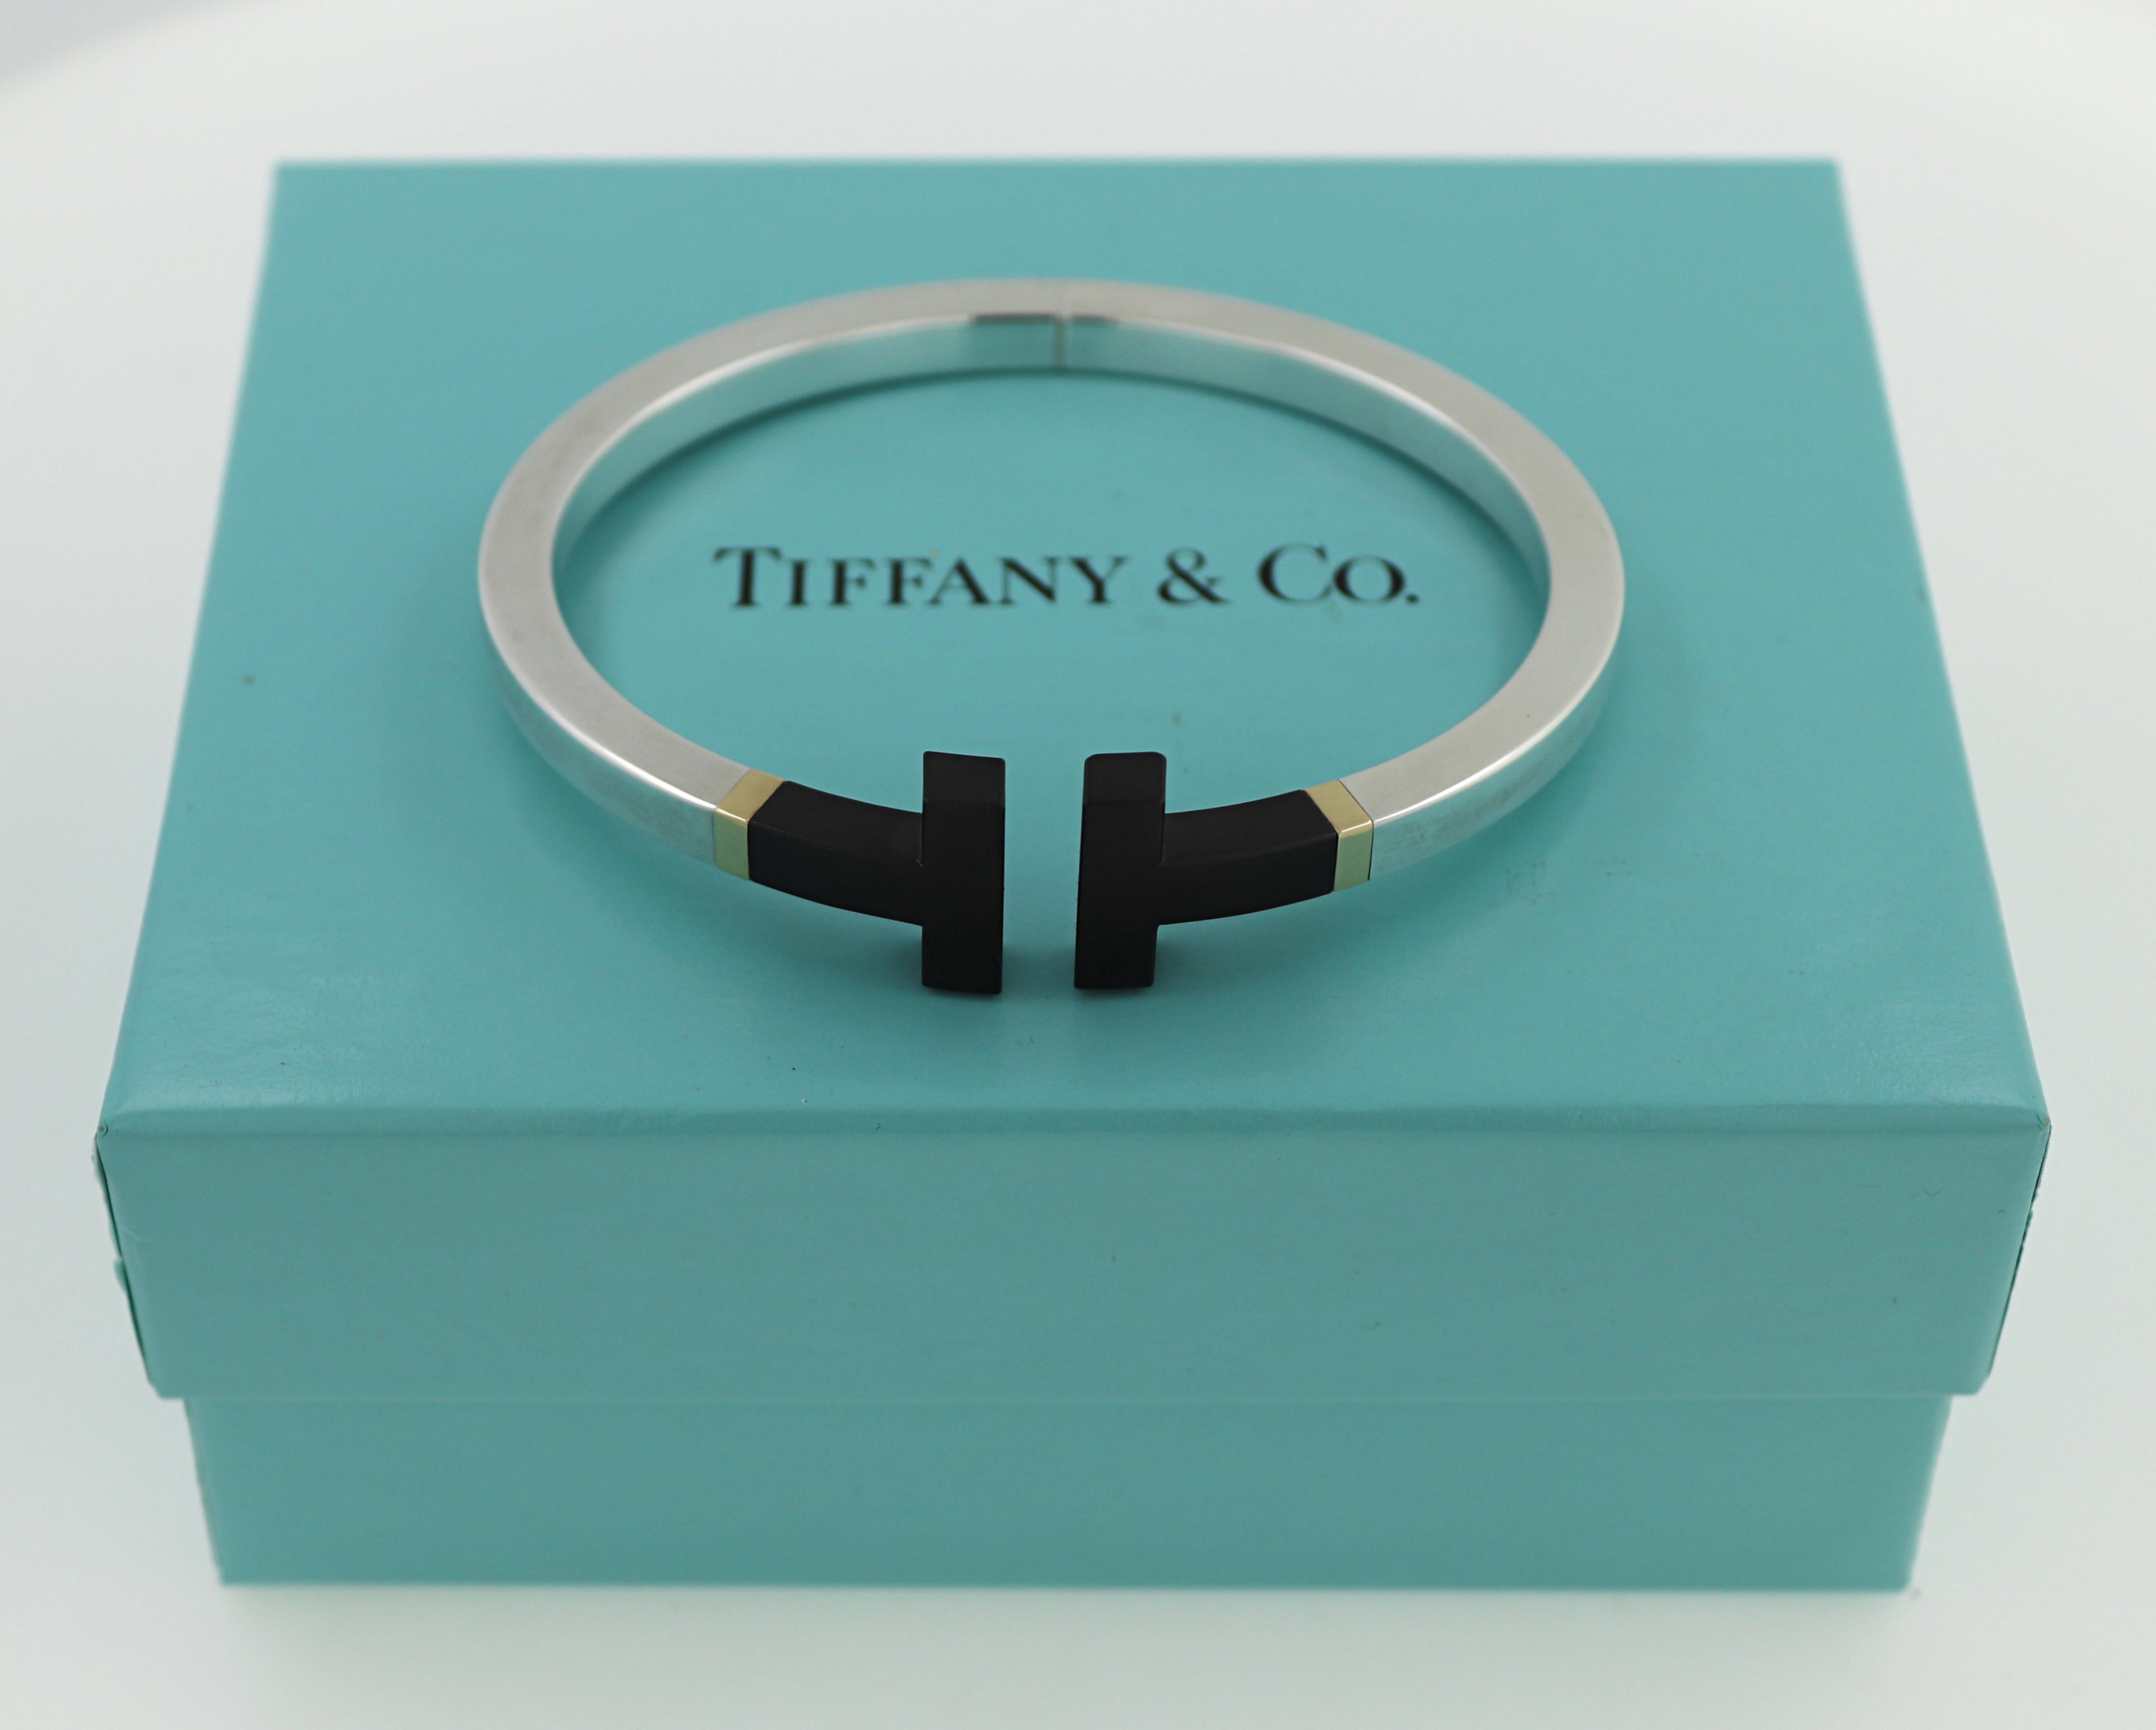 Tiffany & Co. Ceramic, Sterling Silver, 18k Yellow Gold “T” Bracelet For Sale 12